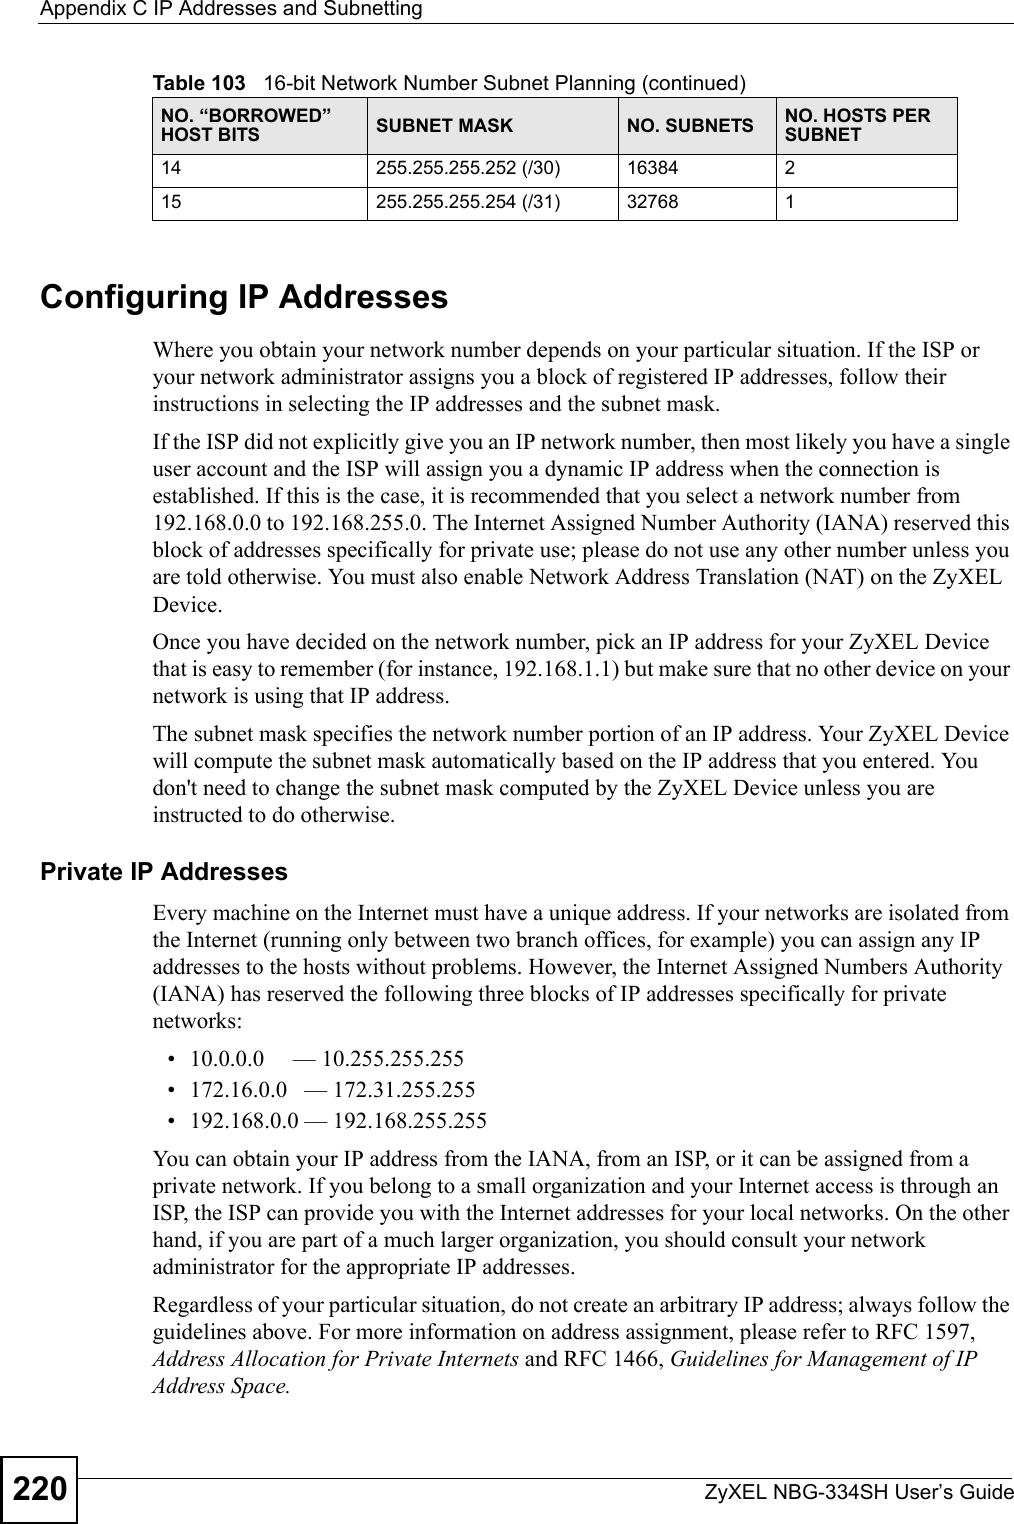 Appendix C IP Addresses and SubnettingZyXEL NBG-334SH User’s Guide220Configuring IP AddressesWhere you obtain your network number depends on your particular situation. If the ISP or your network administrator assigns you a block of registered IP addresses, follow their instructions in selecting the IP addresses and the subnet mask.If the ISP did not explicitly give you an IP network number, then most likely you have a single user account and the ISP will assign you a dynamic IP address when the connection is established. If this is the case, it is recommended that you select a network number from 192.168.0.0 to 192.168.255.0. The Internet Assigned Number Authority (IANA) reserved this block of addresses specifically for private use; please do not use any other number unless you are told otherwise. You must also enable Network Address Translation (NAT) on the ZyXEL Device.  Once you have decided on the network number, pick an IP address for your ZyXEL Device that is easy to remember (for instance, 192.168.1.1) but make sure that no other device on your network is using that IP address.The subnet mask specifies the network number portion of an IP address. Your ZyXEL Device will compute the subnet mask automatically based on the IP address that you entered. You don&apos;t need to change the subnet mask computed by the ZyXEL Device unless you are instructed to do otherwise.Private IP AddressesEvery machine on the Internet must have a unique address. If your networks are isolated from the Internet (running only between two branch offices, for example) you can assign any IP addresses to the hosts without problems. However, the Internet Assigned Numbers Authority (IANA) has reserved the following three blocks of IP addresses specifically for private networks:• 10.0.0.0     — 10.255.255.255• 172.16.0.0   — 172.31.255.255• 192.168.0.0 — 192.168.255.255You can obtain your IP address from the IANA, from an ISP, or it can be assigned from a private network. If you belong to a small organization and your Internet access is through an ISP, the ISP can provide you with the Internet addresses for your local networks. On the other hand, if you are part of a much larger organization, you should consult your network administrator for the appropriate IP addresses.Regardless of your particular situation, do not create an arbitrary IP address; always follow the guidelines above. For more information on address assignment, please refer to RFC 1597, Address Allocation for Private Internets and RFC 1466, Guidelines for Management of IP Address Space.14 255.255.255.252 (/30) 16384 215 255.255.255.254 (/31) 32768 1Table 103   16-bit Network Number Subnet Planning (continued)NO. “BORROWED” HOST BITS SUBNET MASK NO. SUBNETS NO. HOSTS PER SUBNET